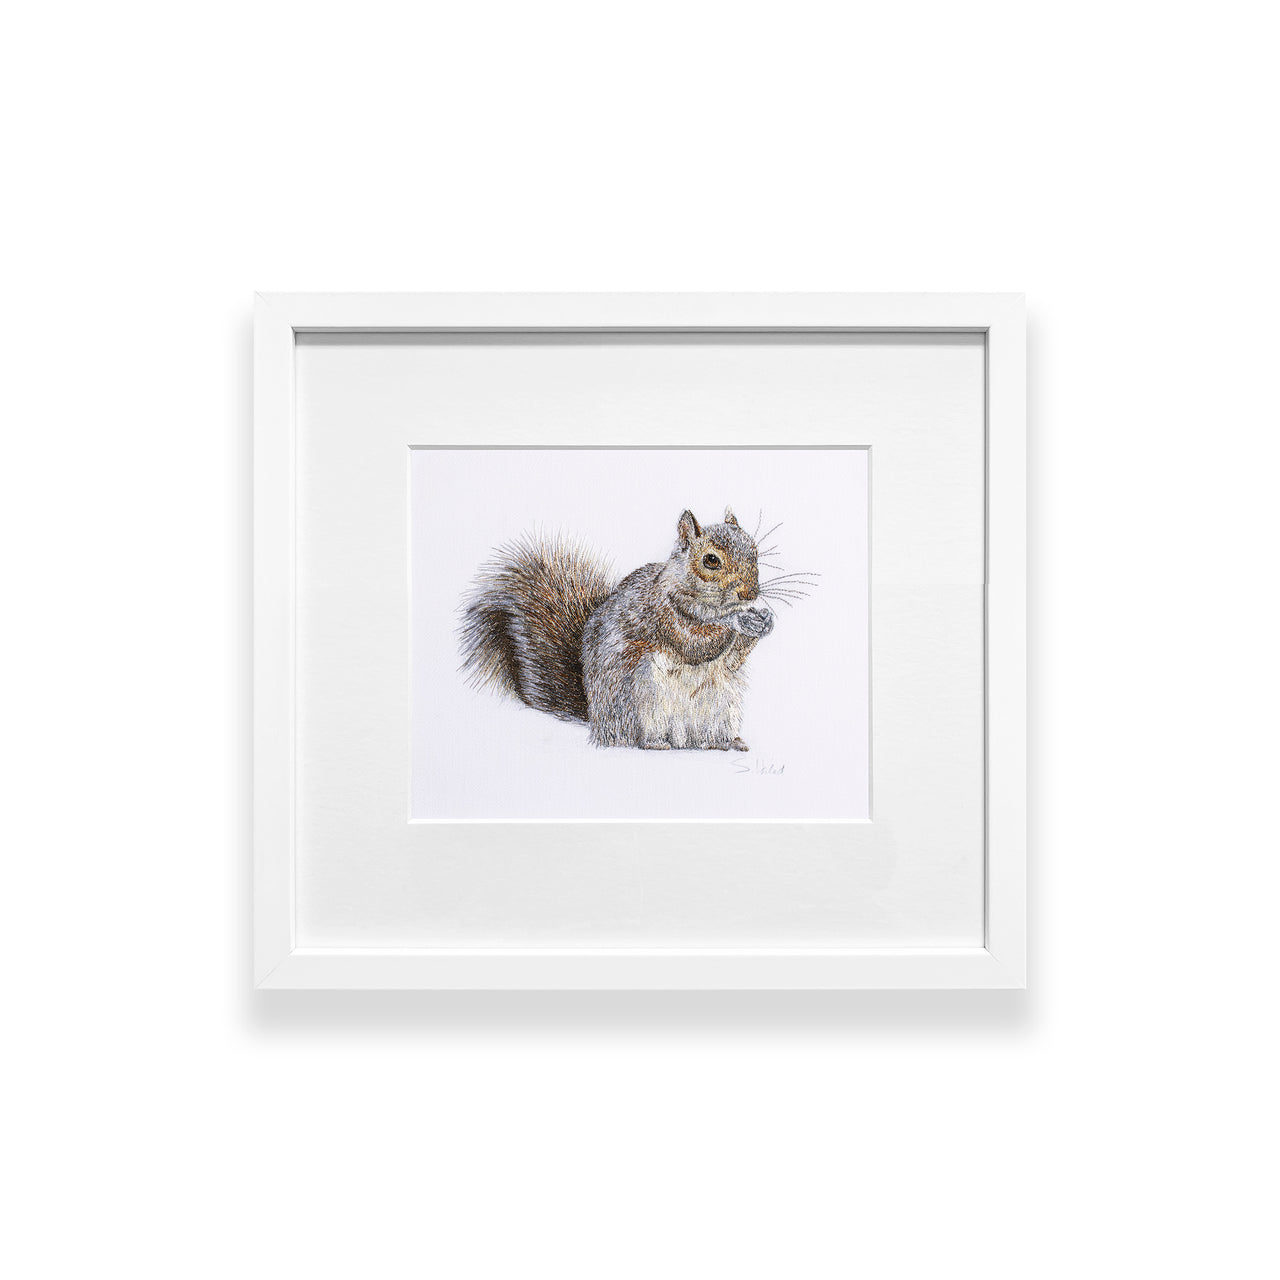 Hand embroidered squirrel in white frame